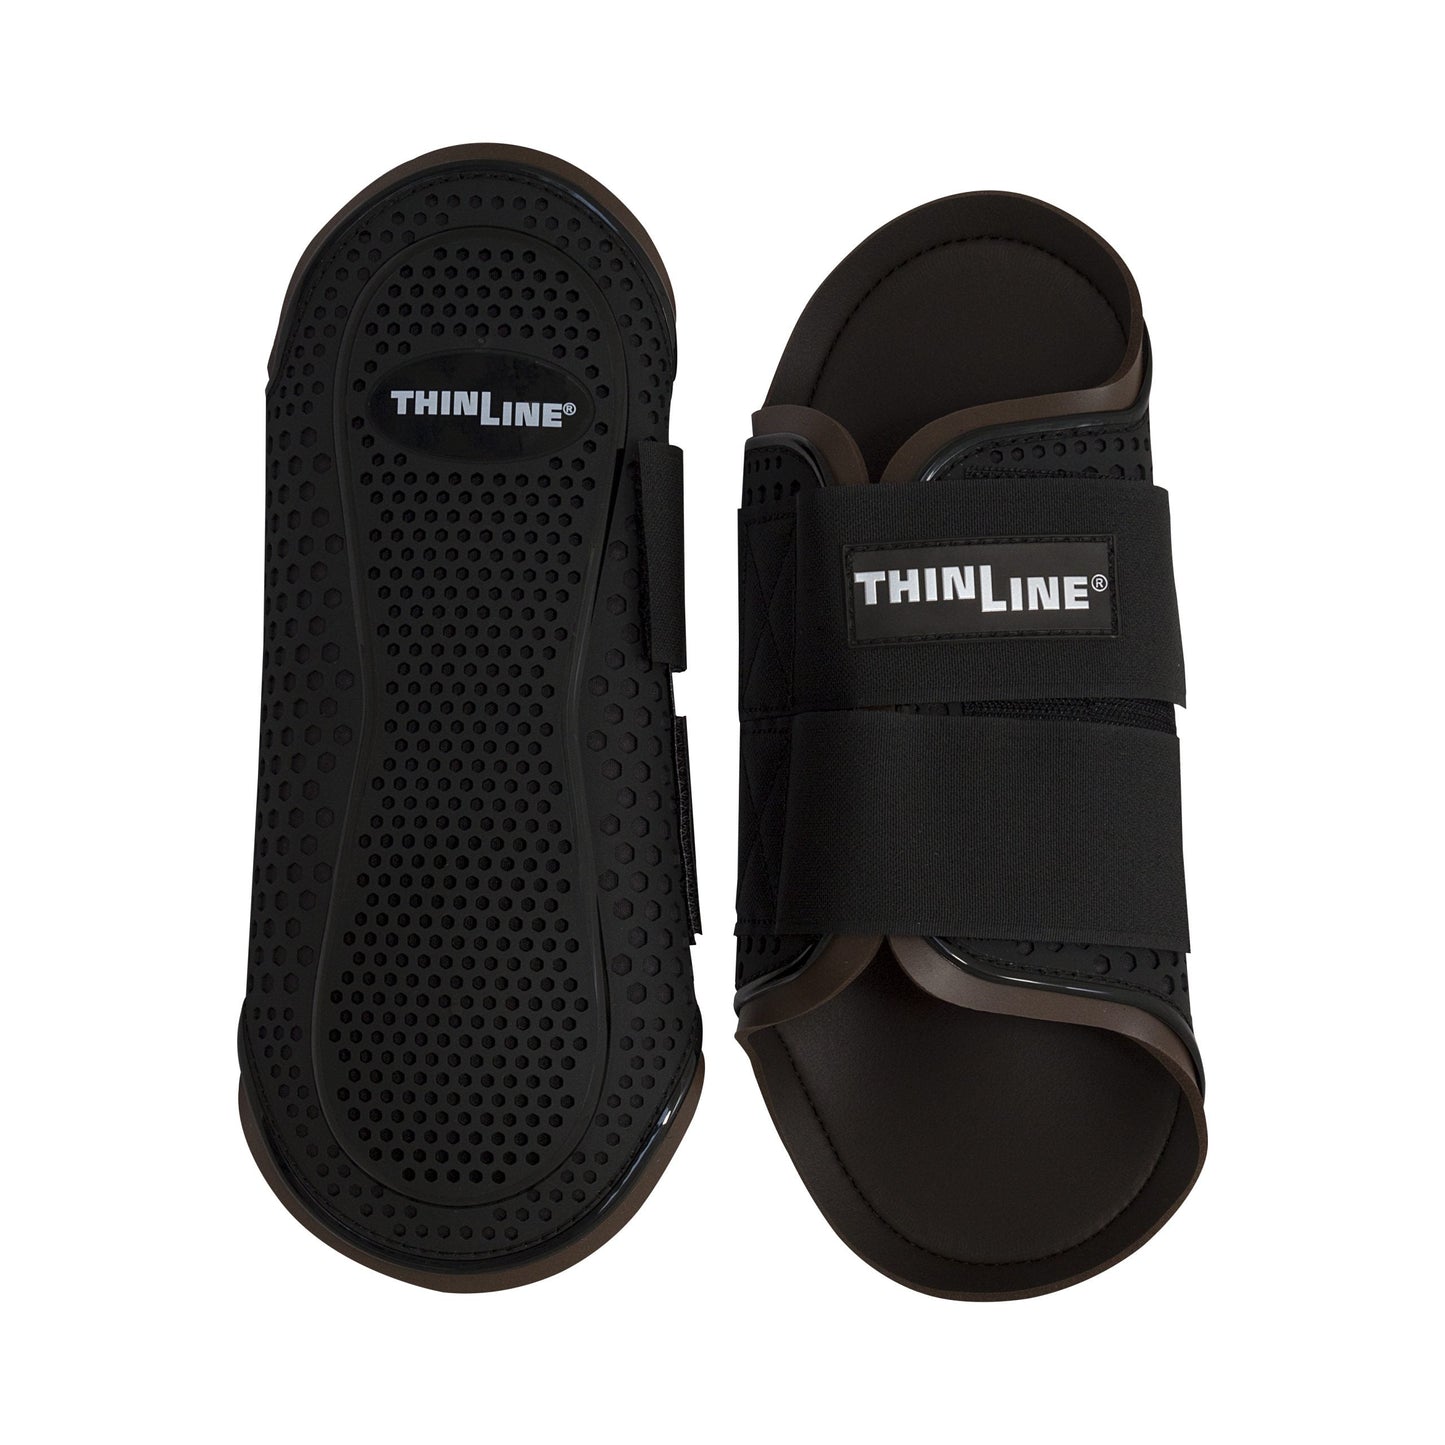 Black Thinline Global orthotic sandals with adjustable straps.